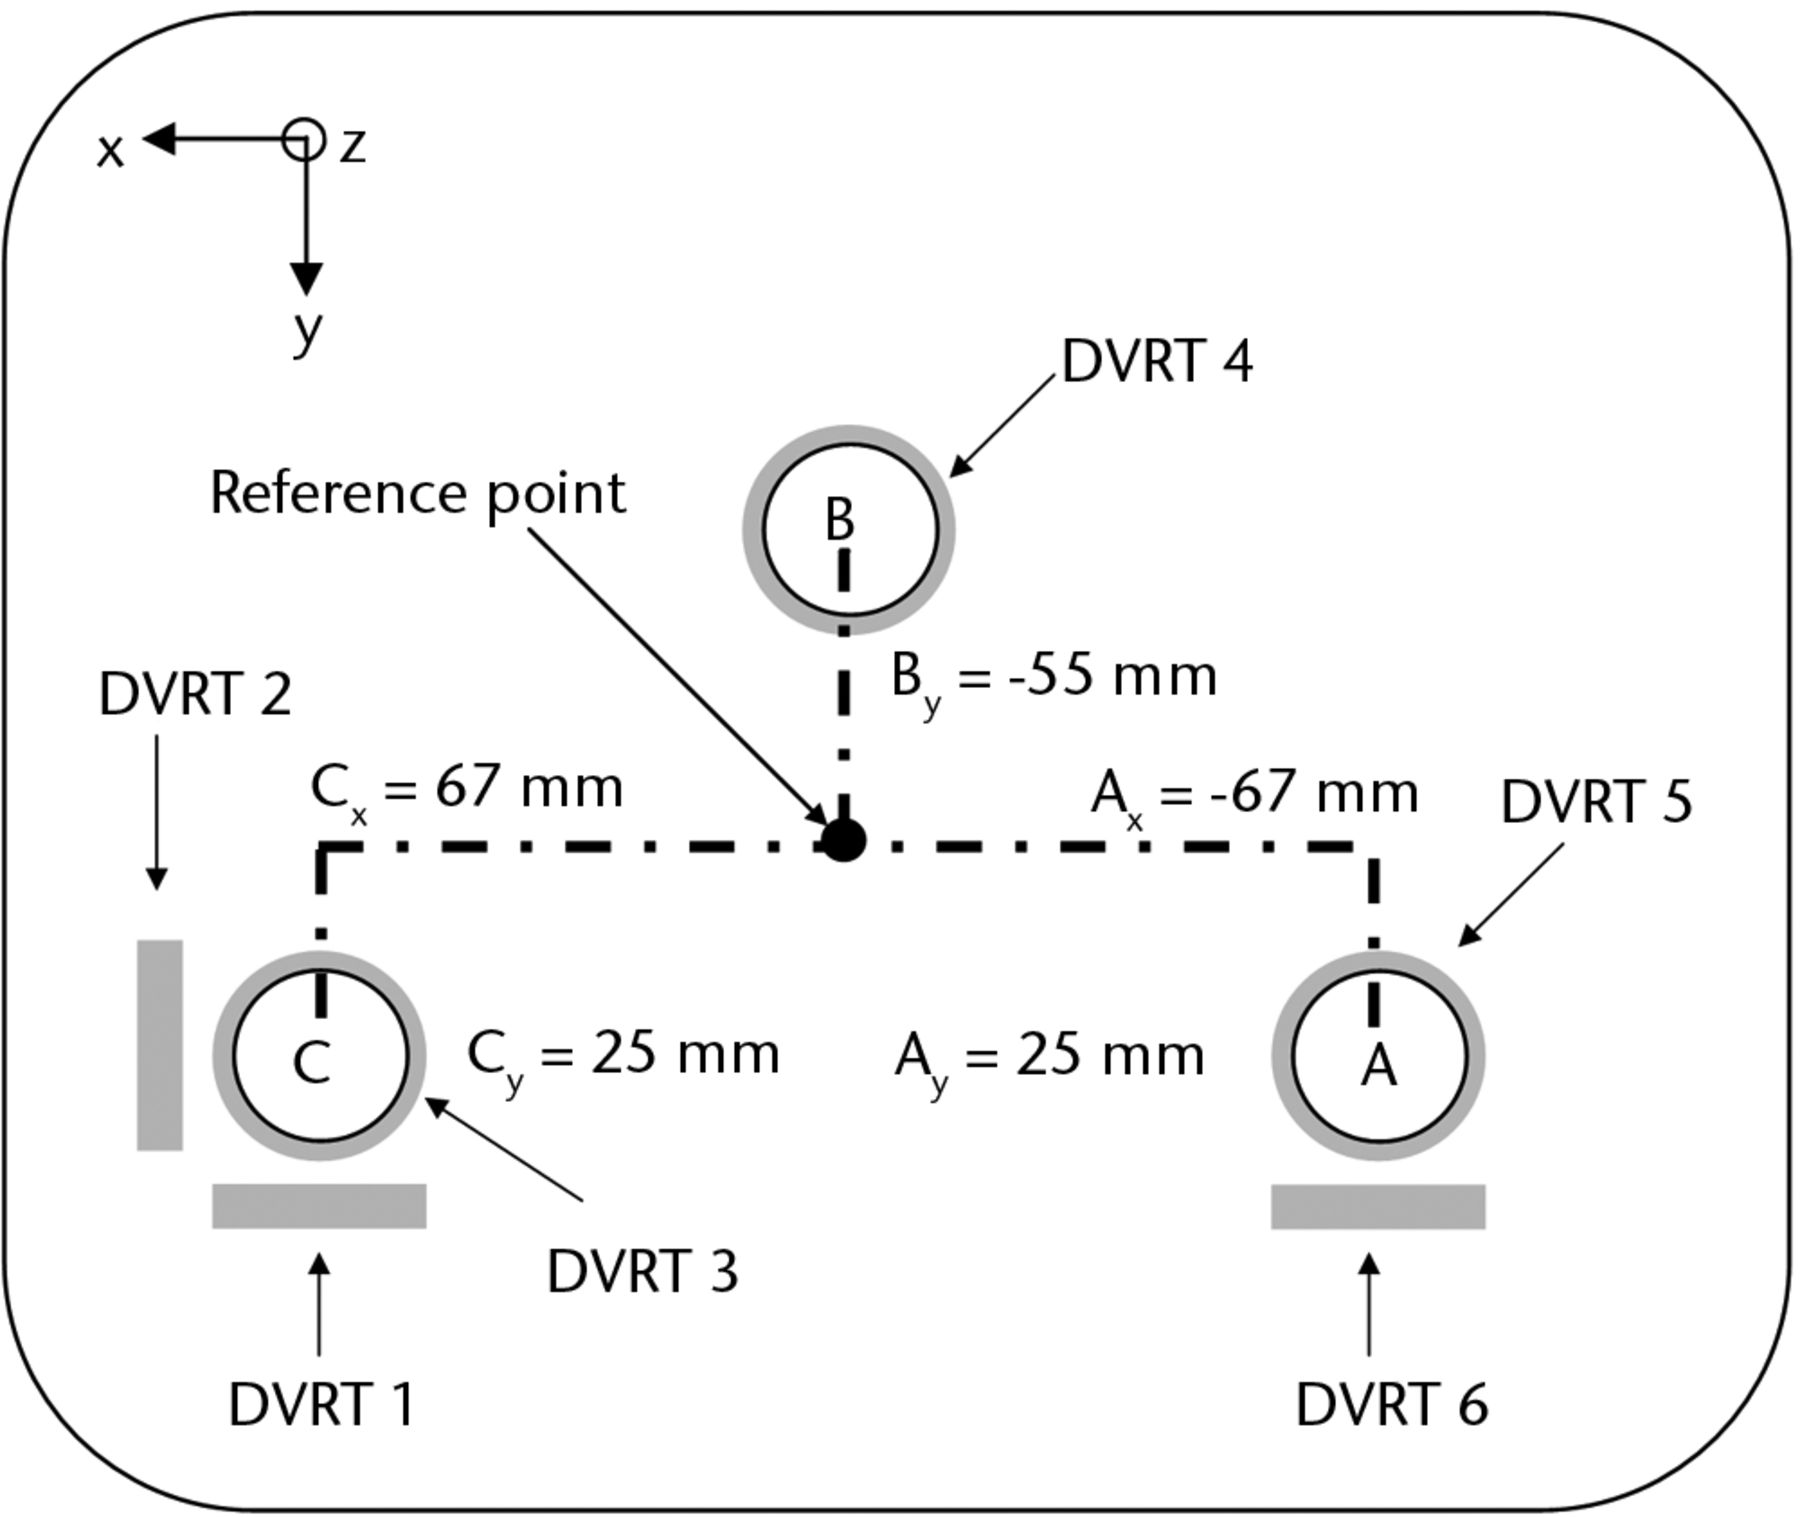 Figs. 1a - 1b 
            
              Figure 1a – three-dimensional
drawing of the micromotion measurement setup. Figure 1b – schematic
drawing of sensor arrangement and reference point used for coordinate
transformations (DVRT, differential variable reluctance transducer).
          